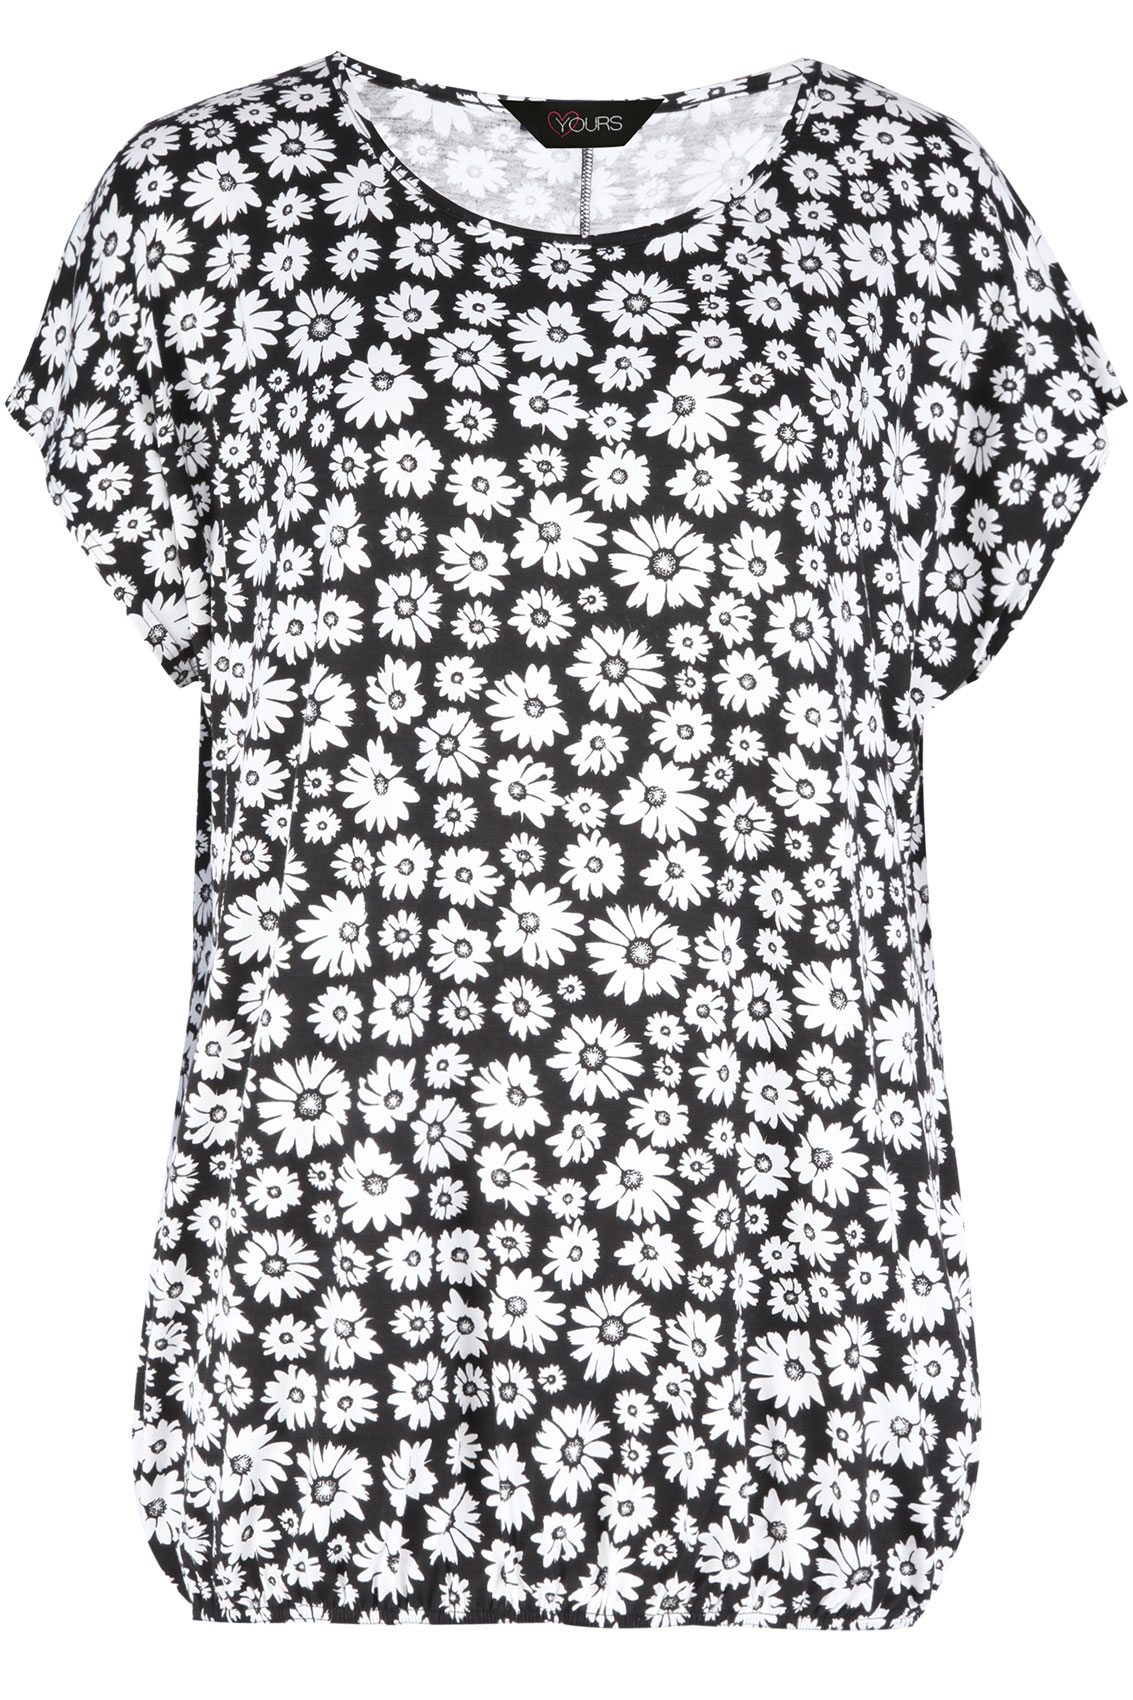 Black And White Daisy Print Jersey Top With Bubble Hem plus size 16,18 ...